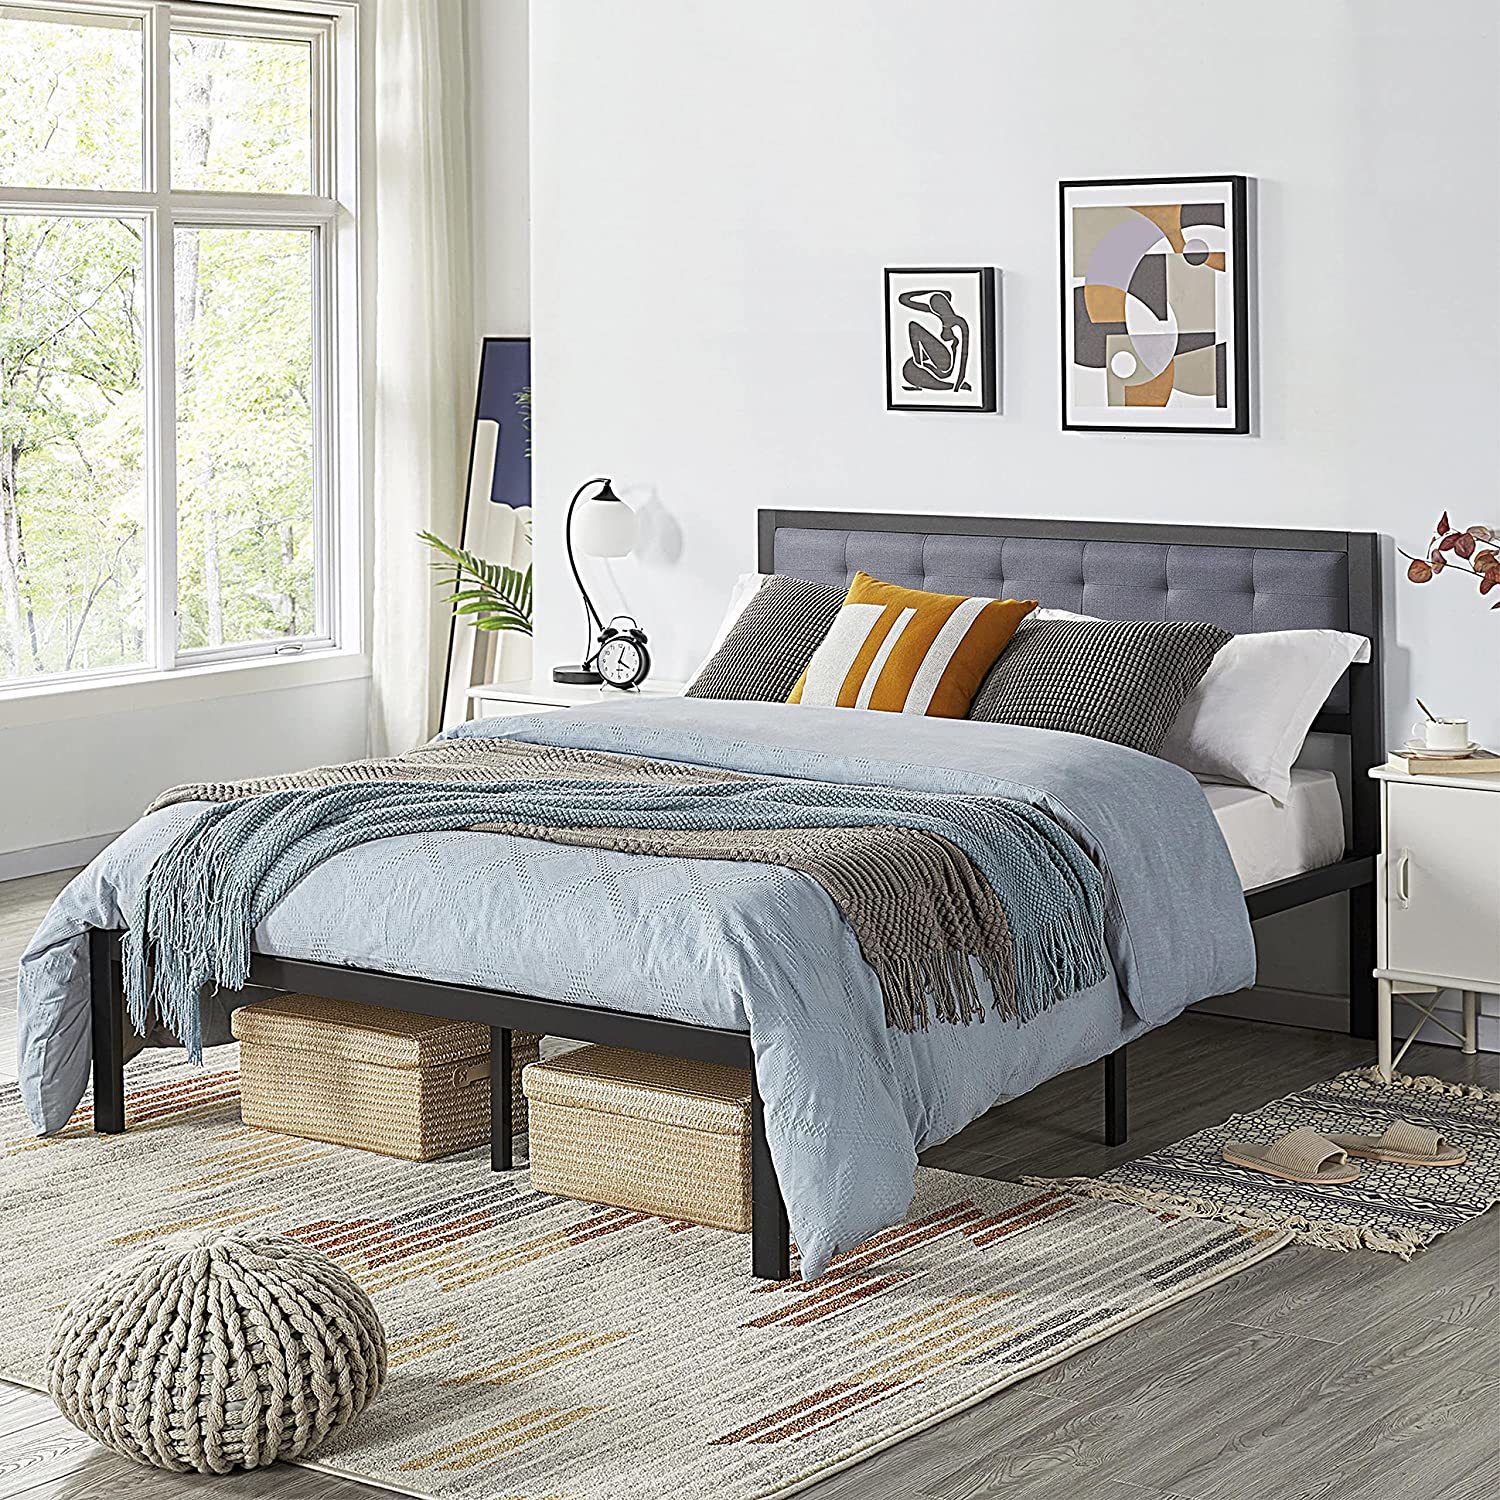 Queen Size Linen Upholstered Platform Metal Bed Frame with Button Tufted Headboard,Gray, UPHOLSTERED HEADBOARD: This bed frame features beautiful upholstery and cushione... - image 2 of 7